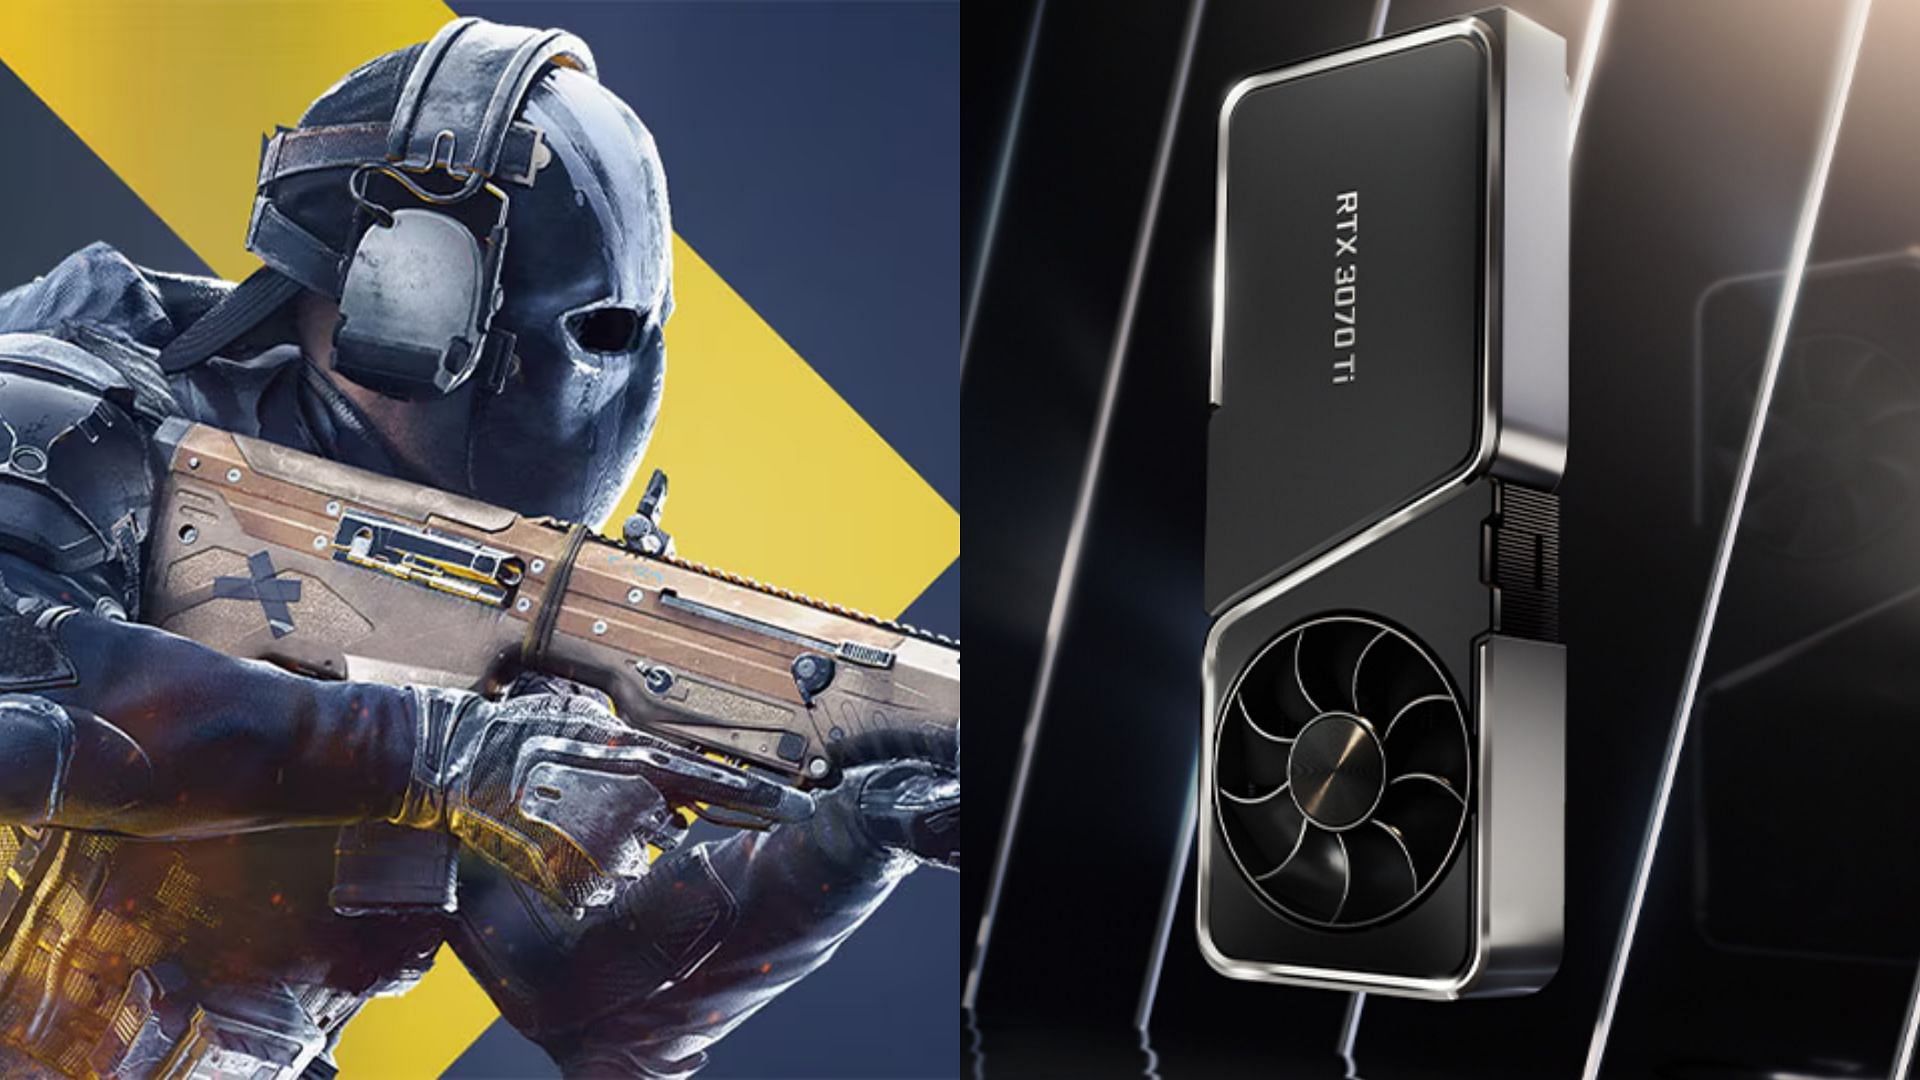 The RTX 3070 and 3070 Ti are powerful GPUs for playing XDefiant (Image via Ubisoft and Nvidia)